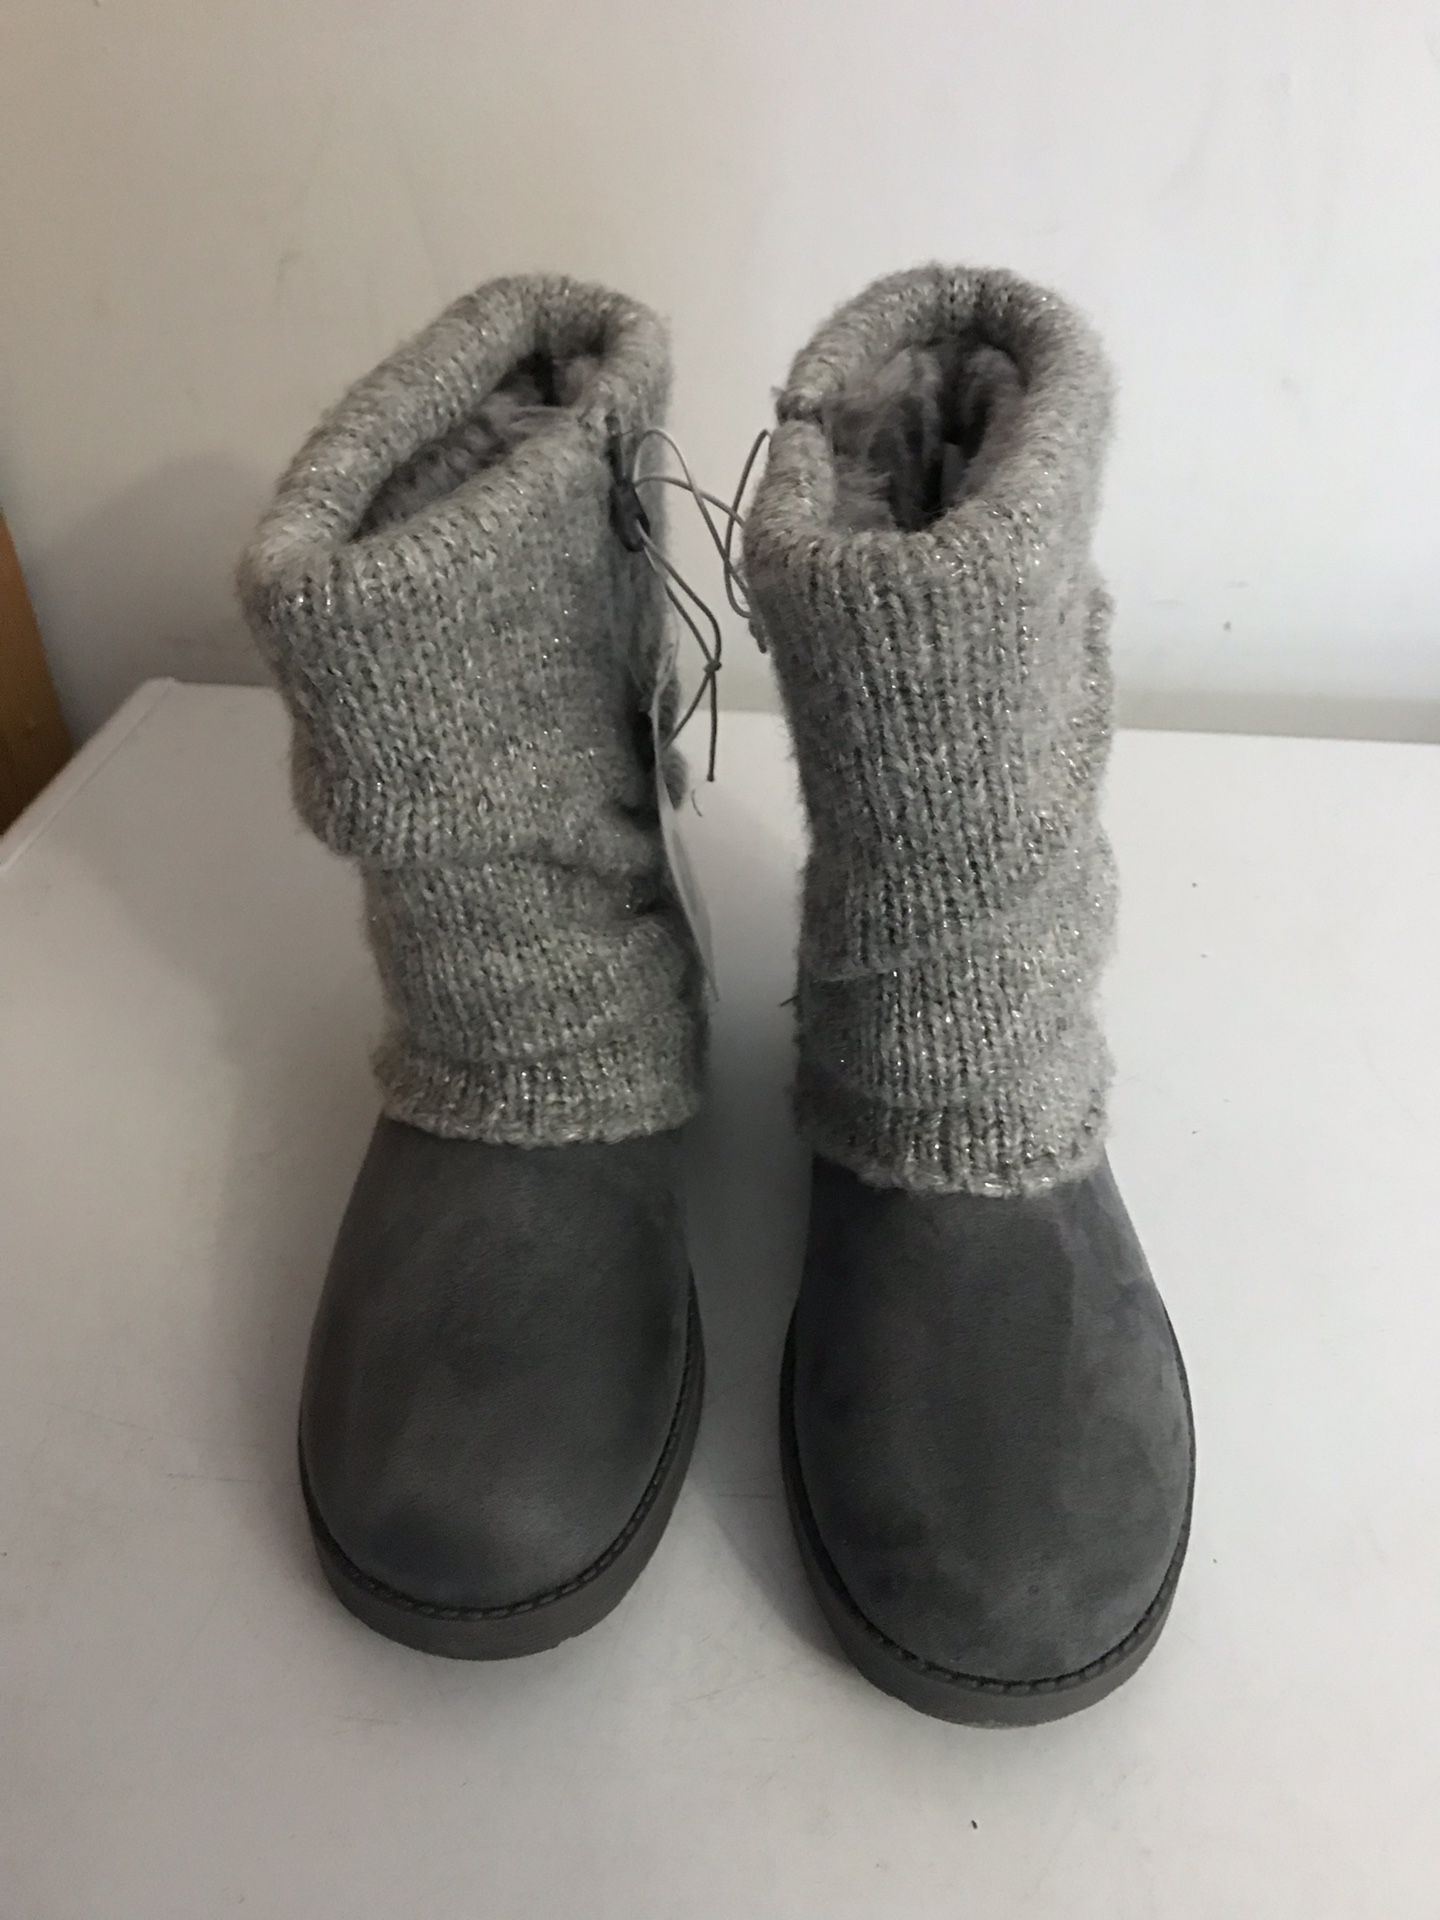 Boots (size3)